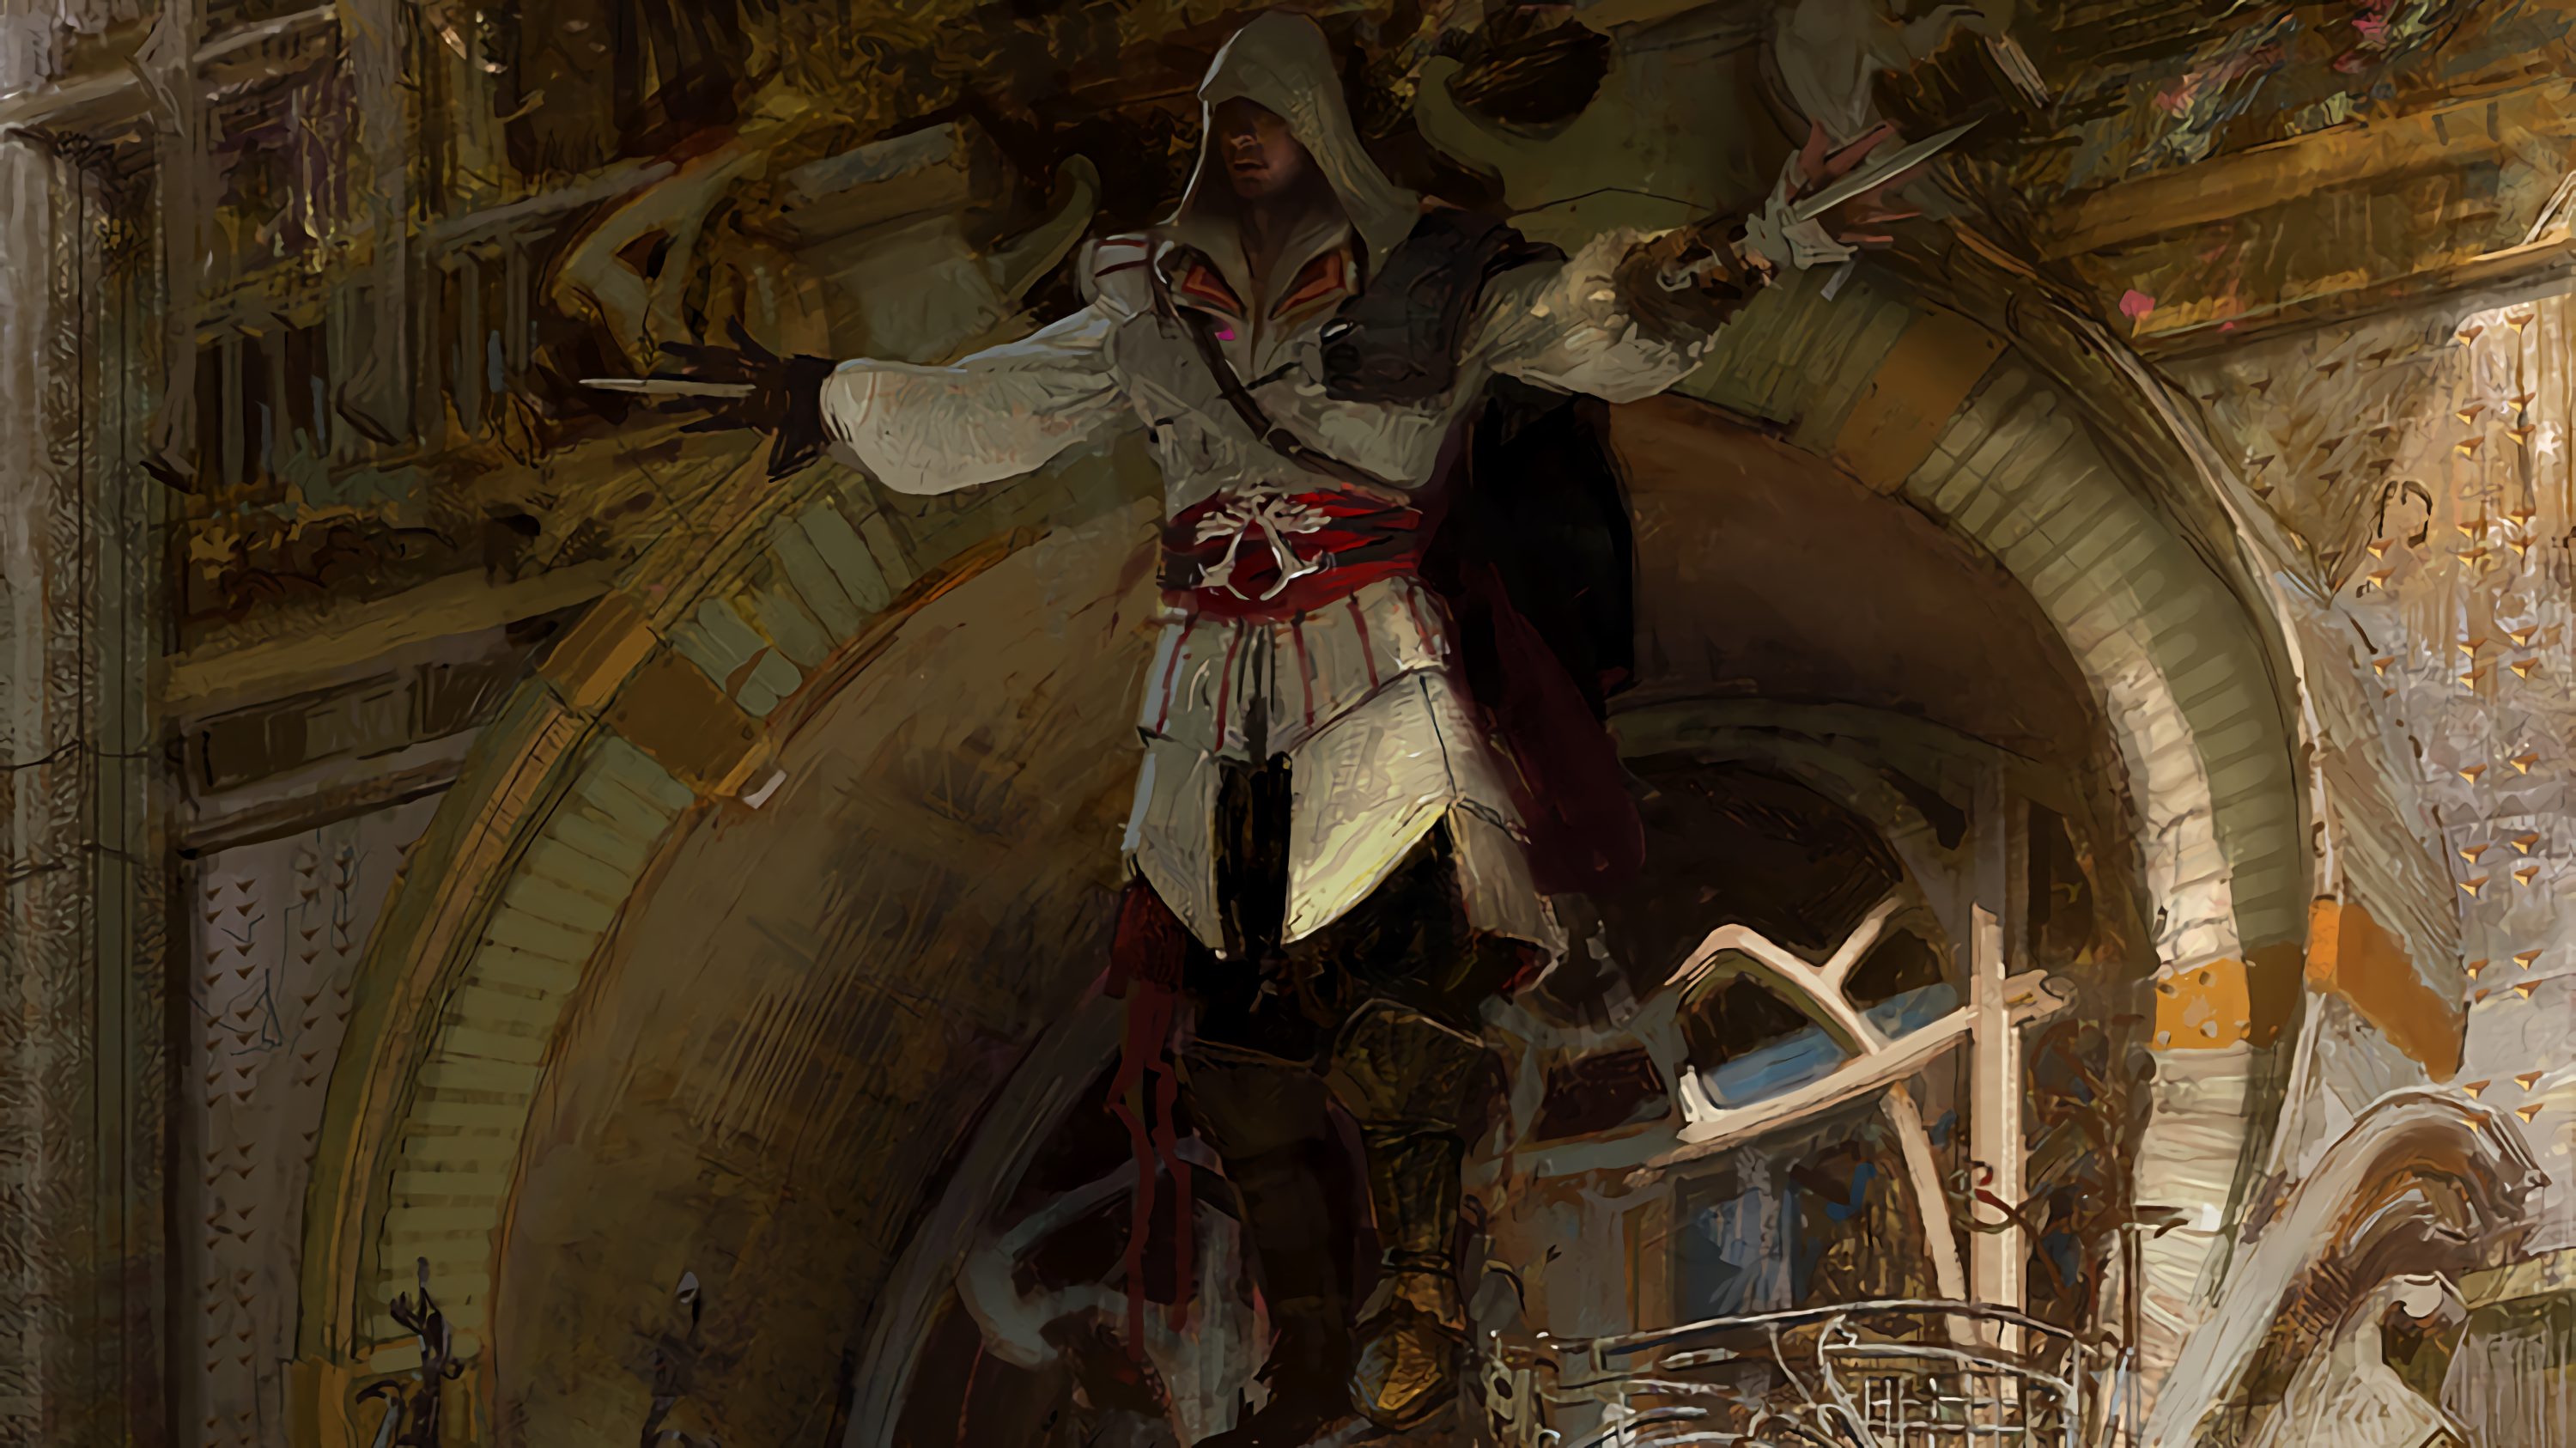 General 3000x1686 Assassin's Creed Ezio Auditore da Firenze Assassin's Creed: Brotherhood video game characters video games PC gaming video game art